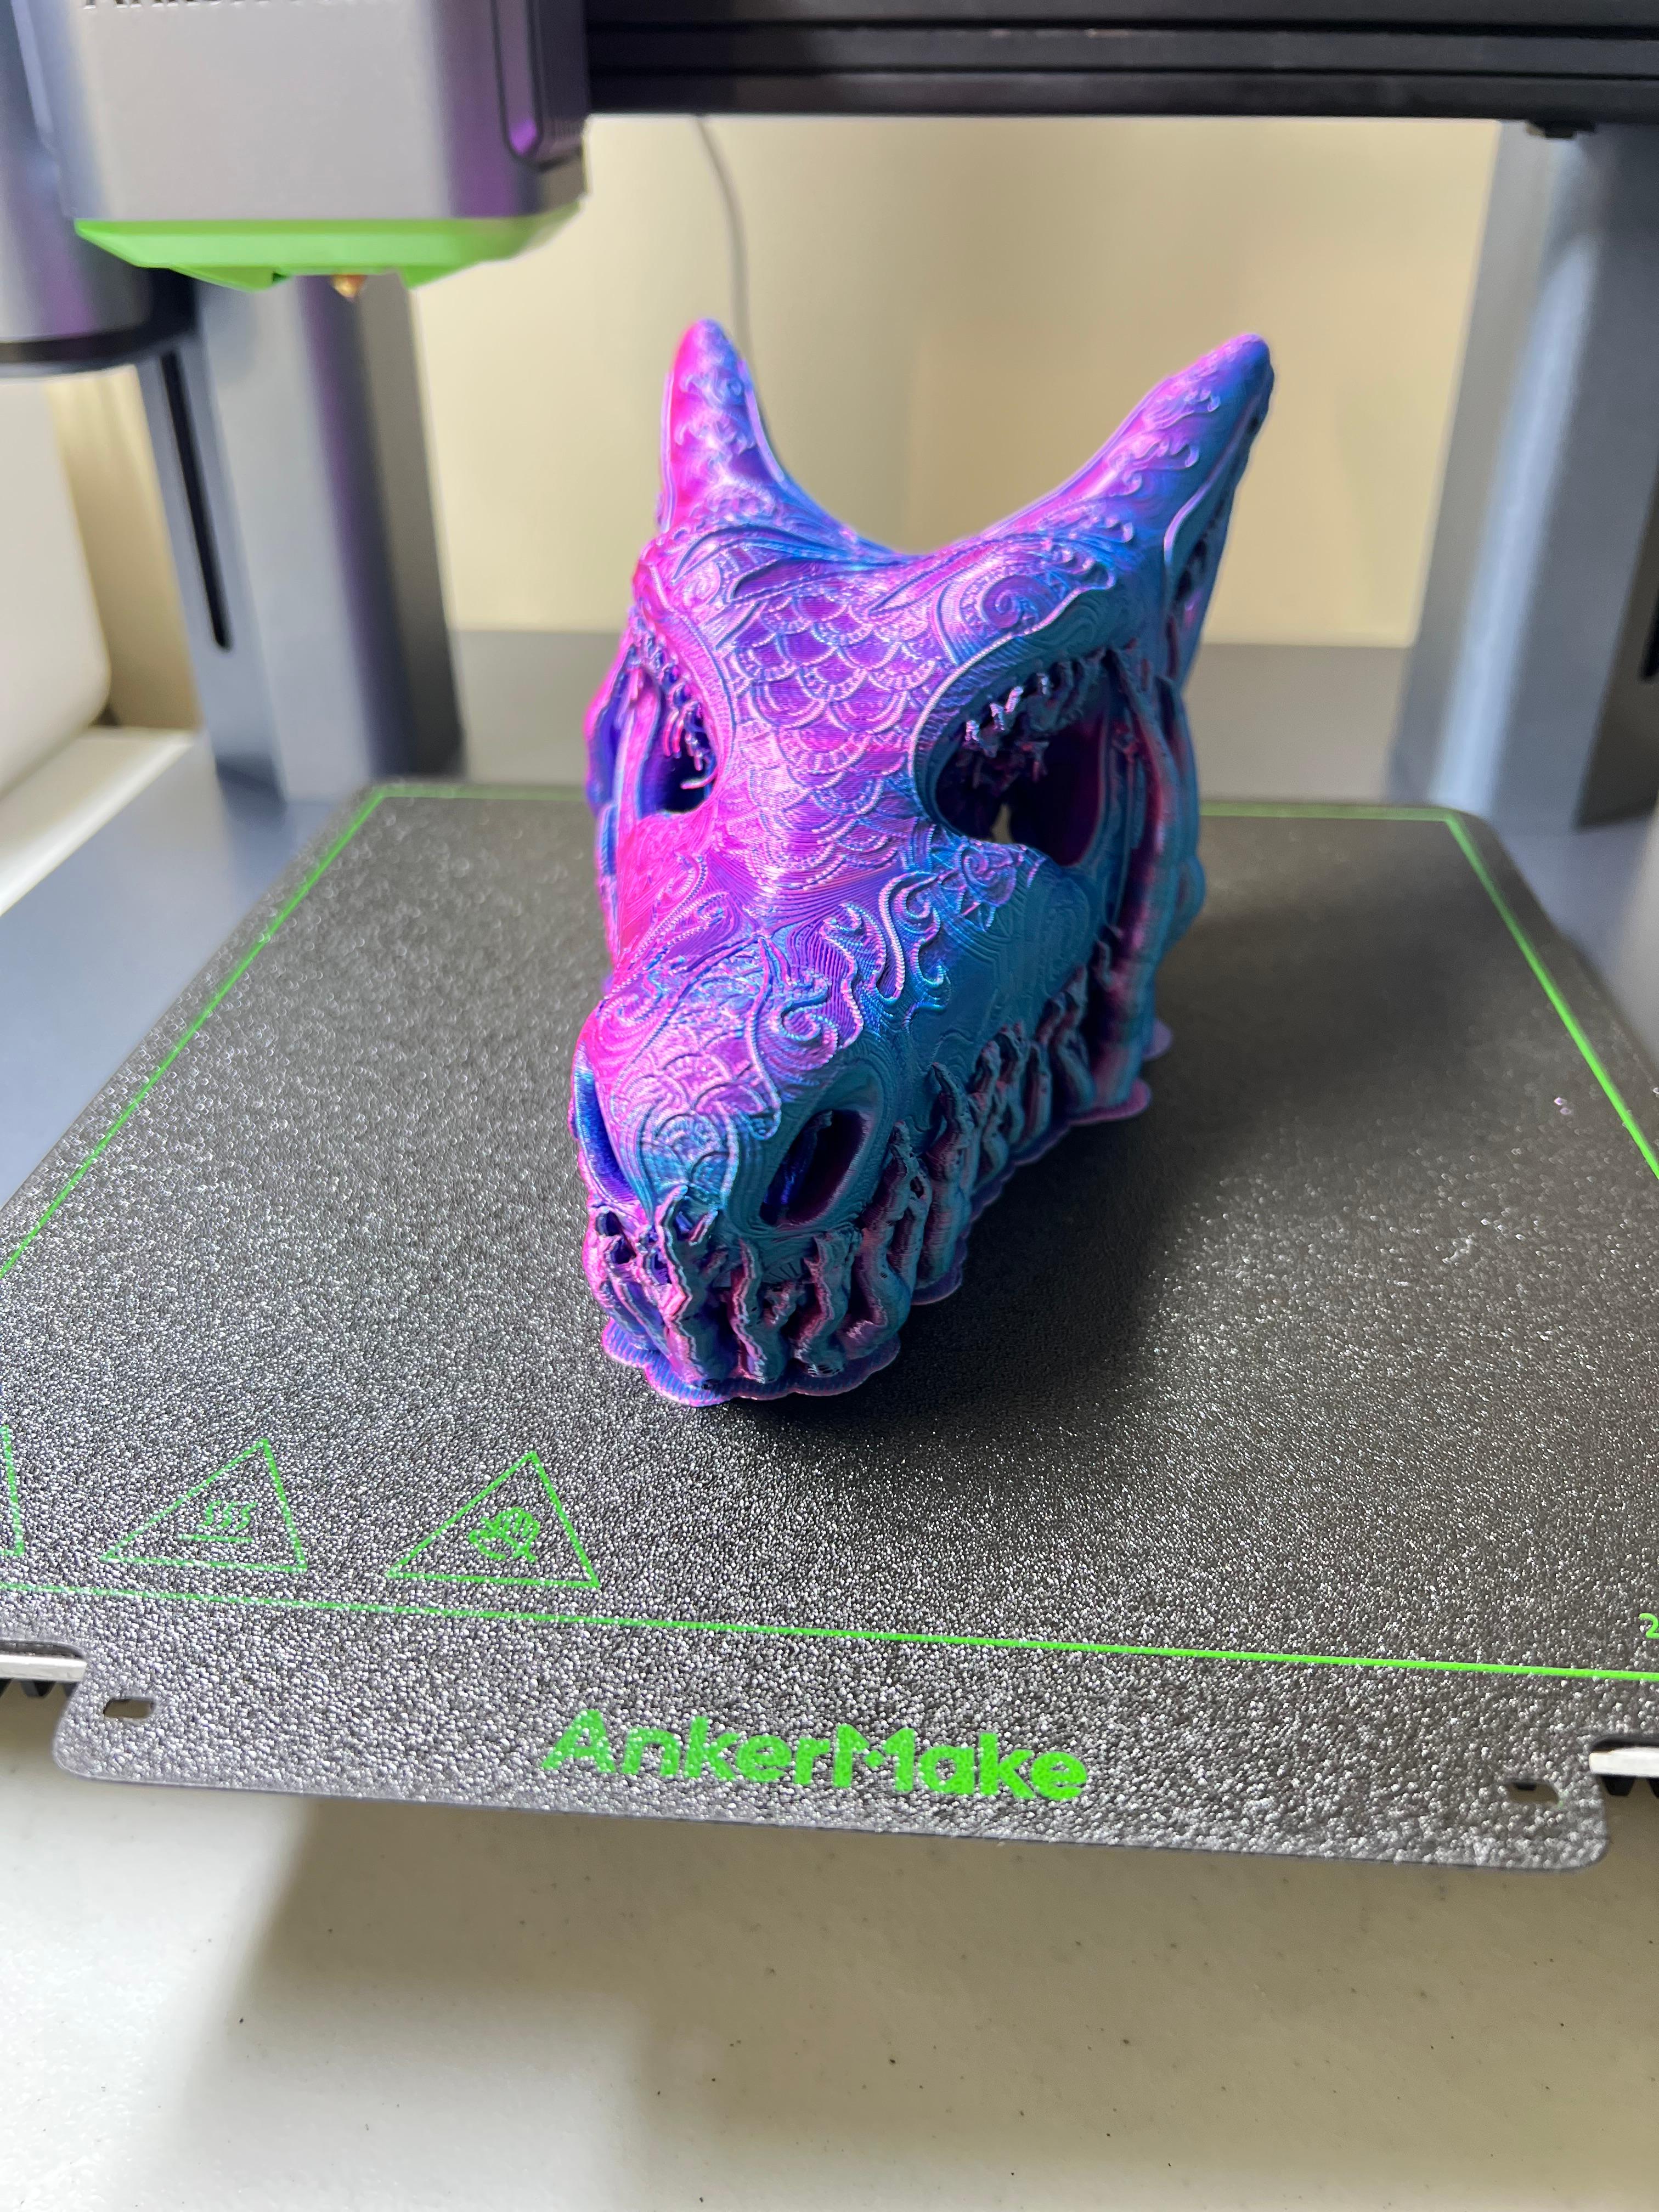 Ornate Charizard Skull (Pokémon) - Had to print this and it printed amazingly!! Used supports on build plate. Printed on AnkerMake M5 using Prusa Slicer. Check me out on TikTok @LyteTec - 3d model